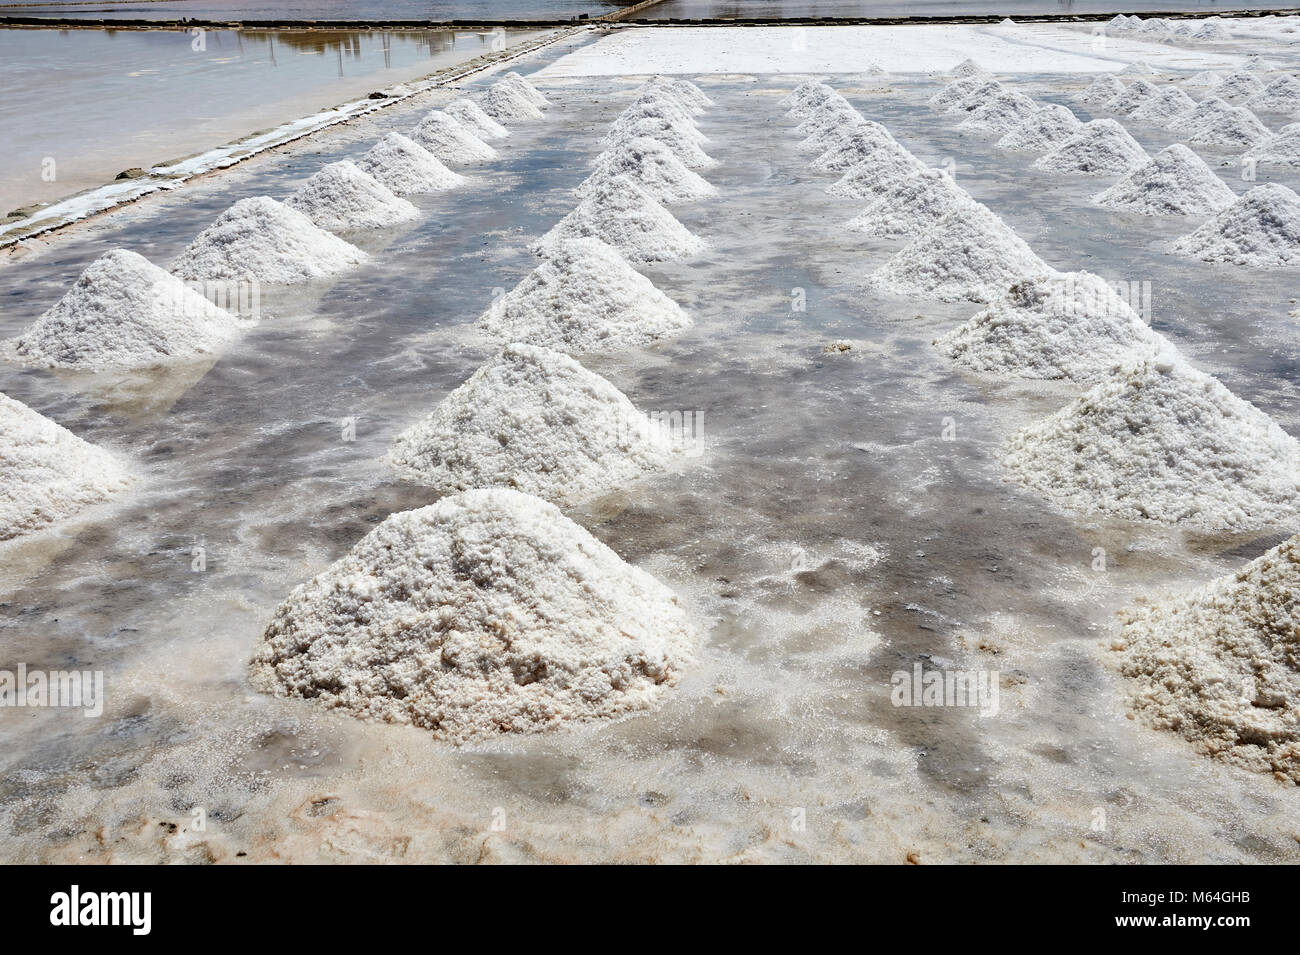 Pictures & images of Men collecting and digging salt in a salt pan on the outskirts of Trapani, Sicily Stock Photo